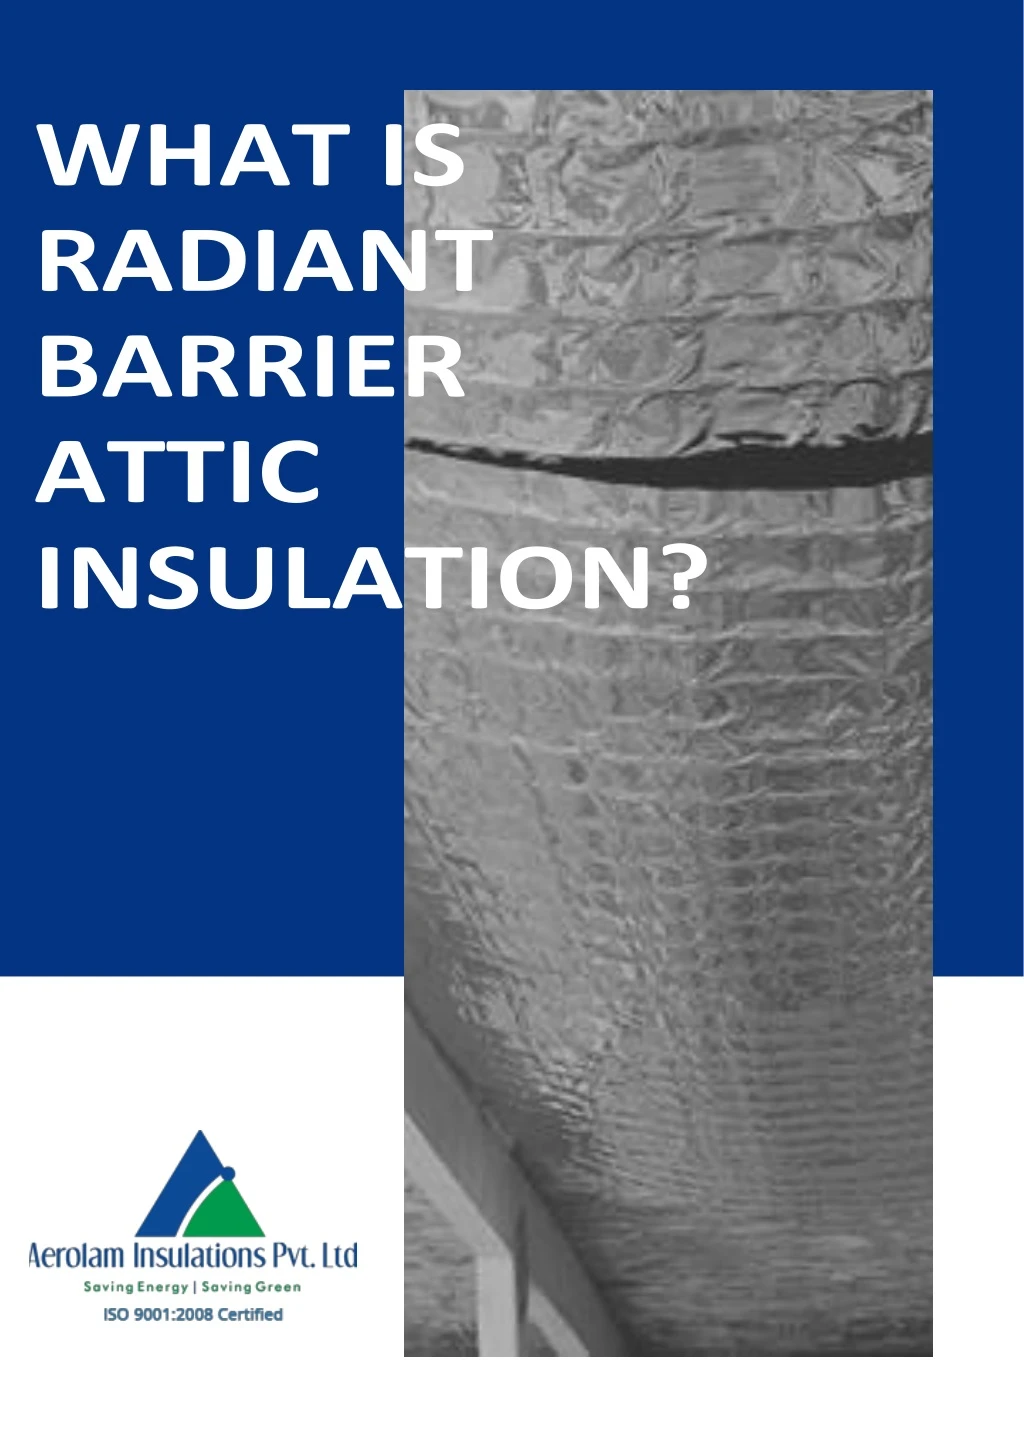 what is radiant barrier attic insulation